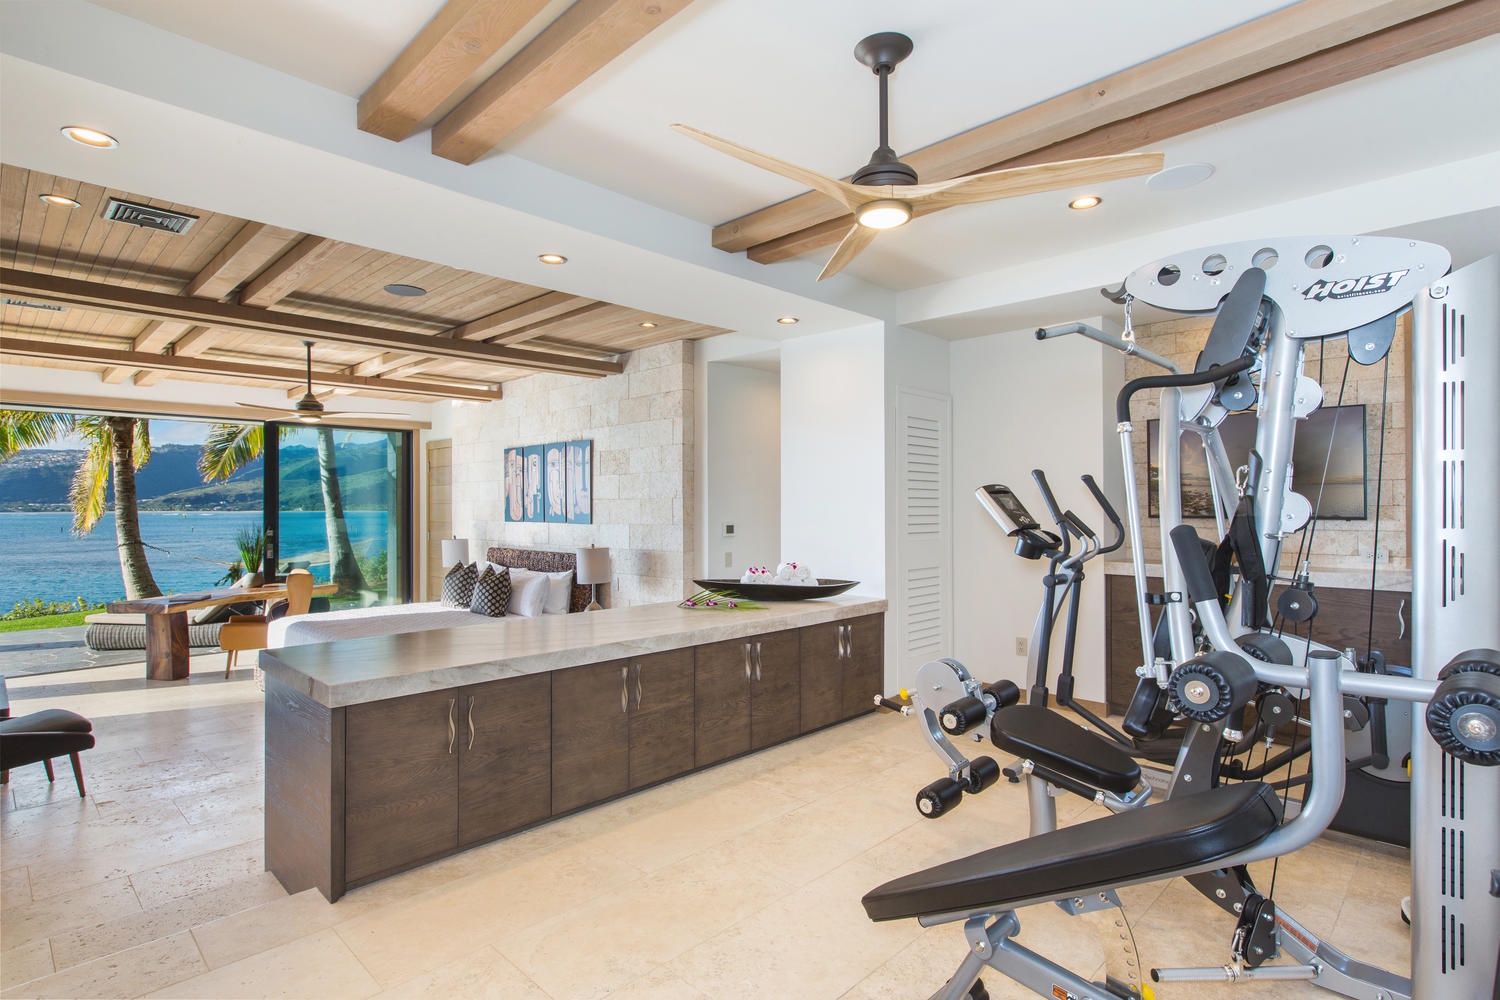 Honolulu Vacation Rentals, Maunalua Bay Estate - Fitness room and downstairs bedroom.